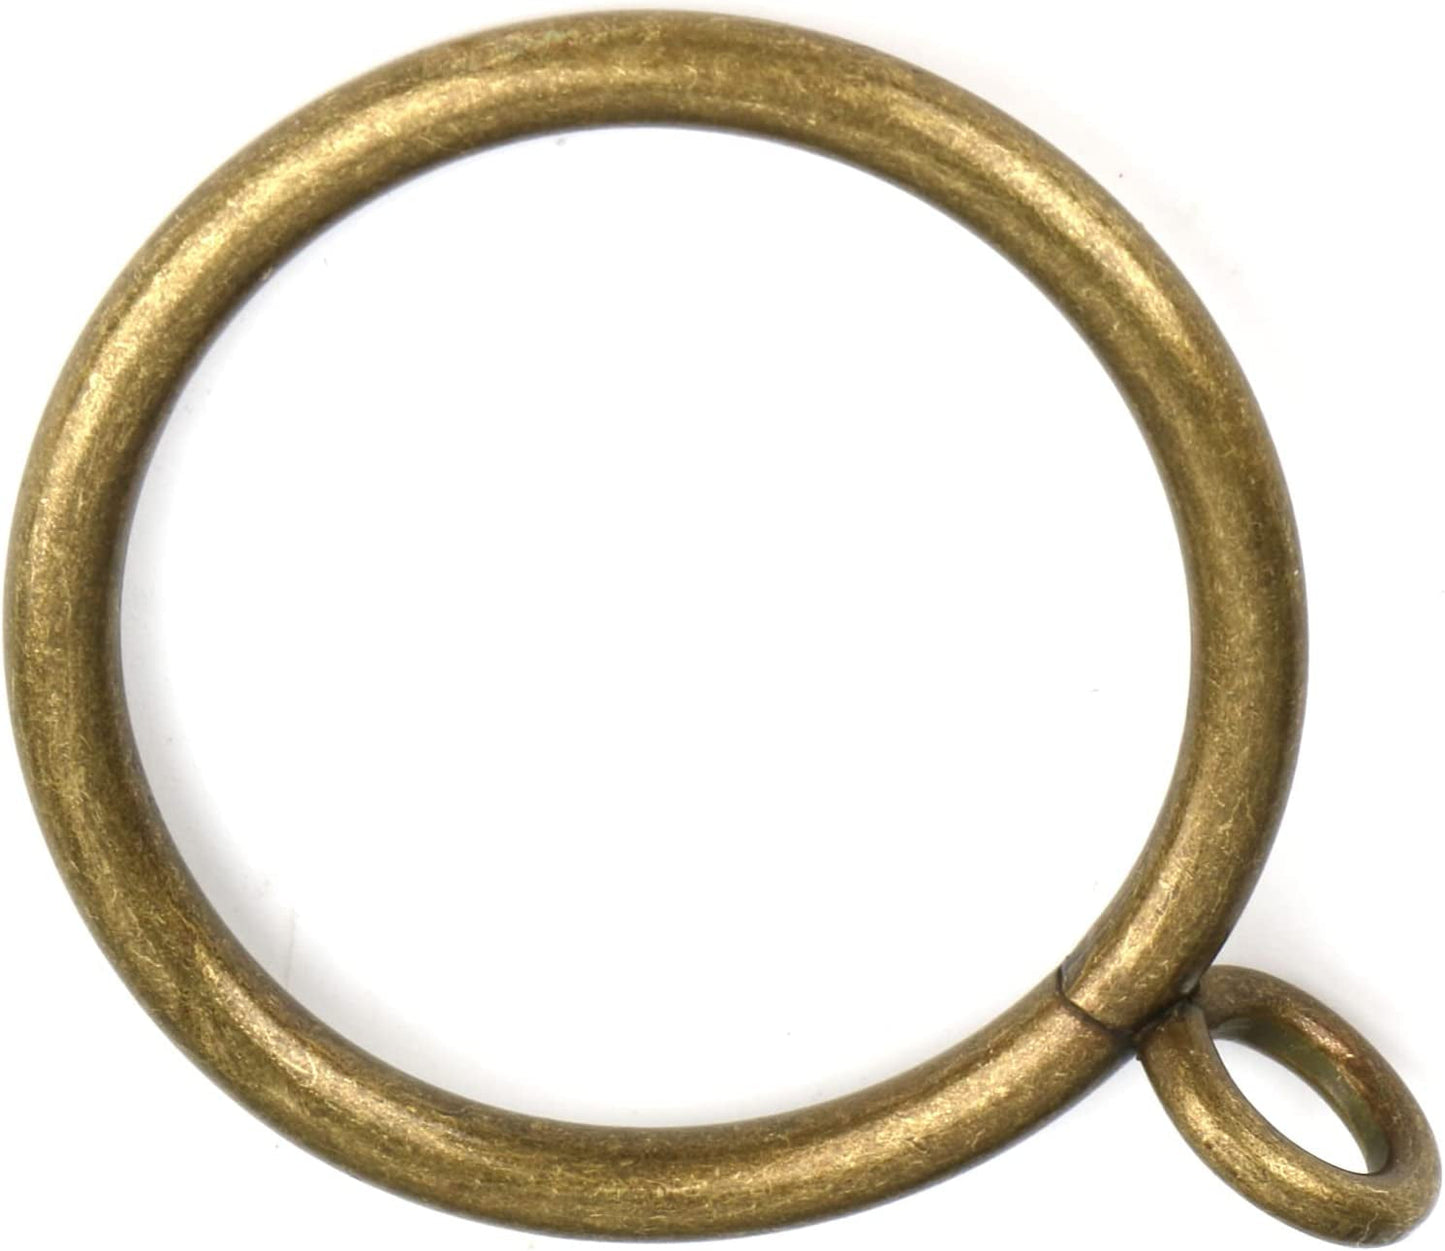 1 1/2-Inch Antique Brass Curtain Rings with Eyelets for Curtain Rods (Set of 30 PCS Curtain Rings)